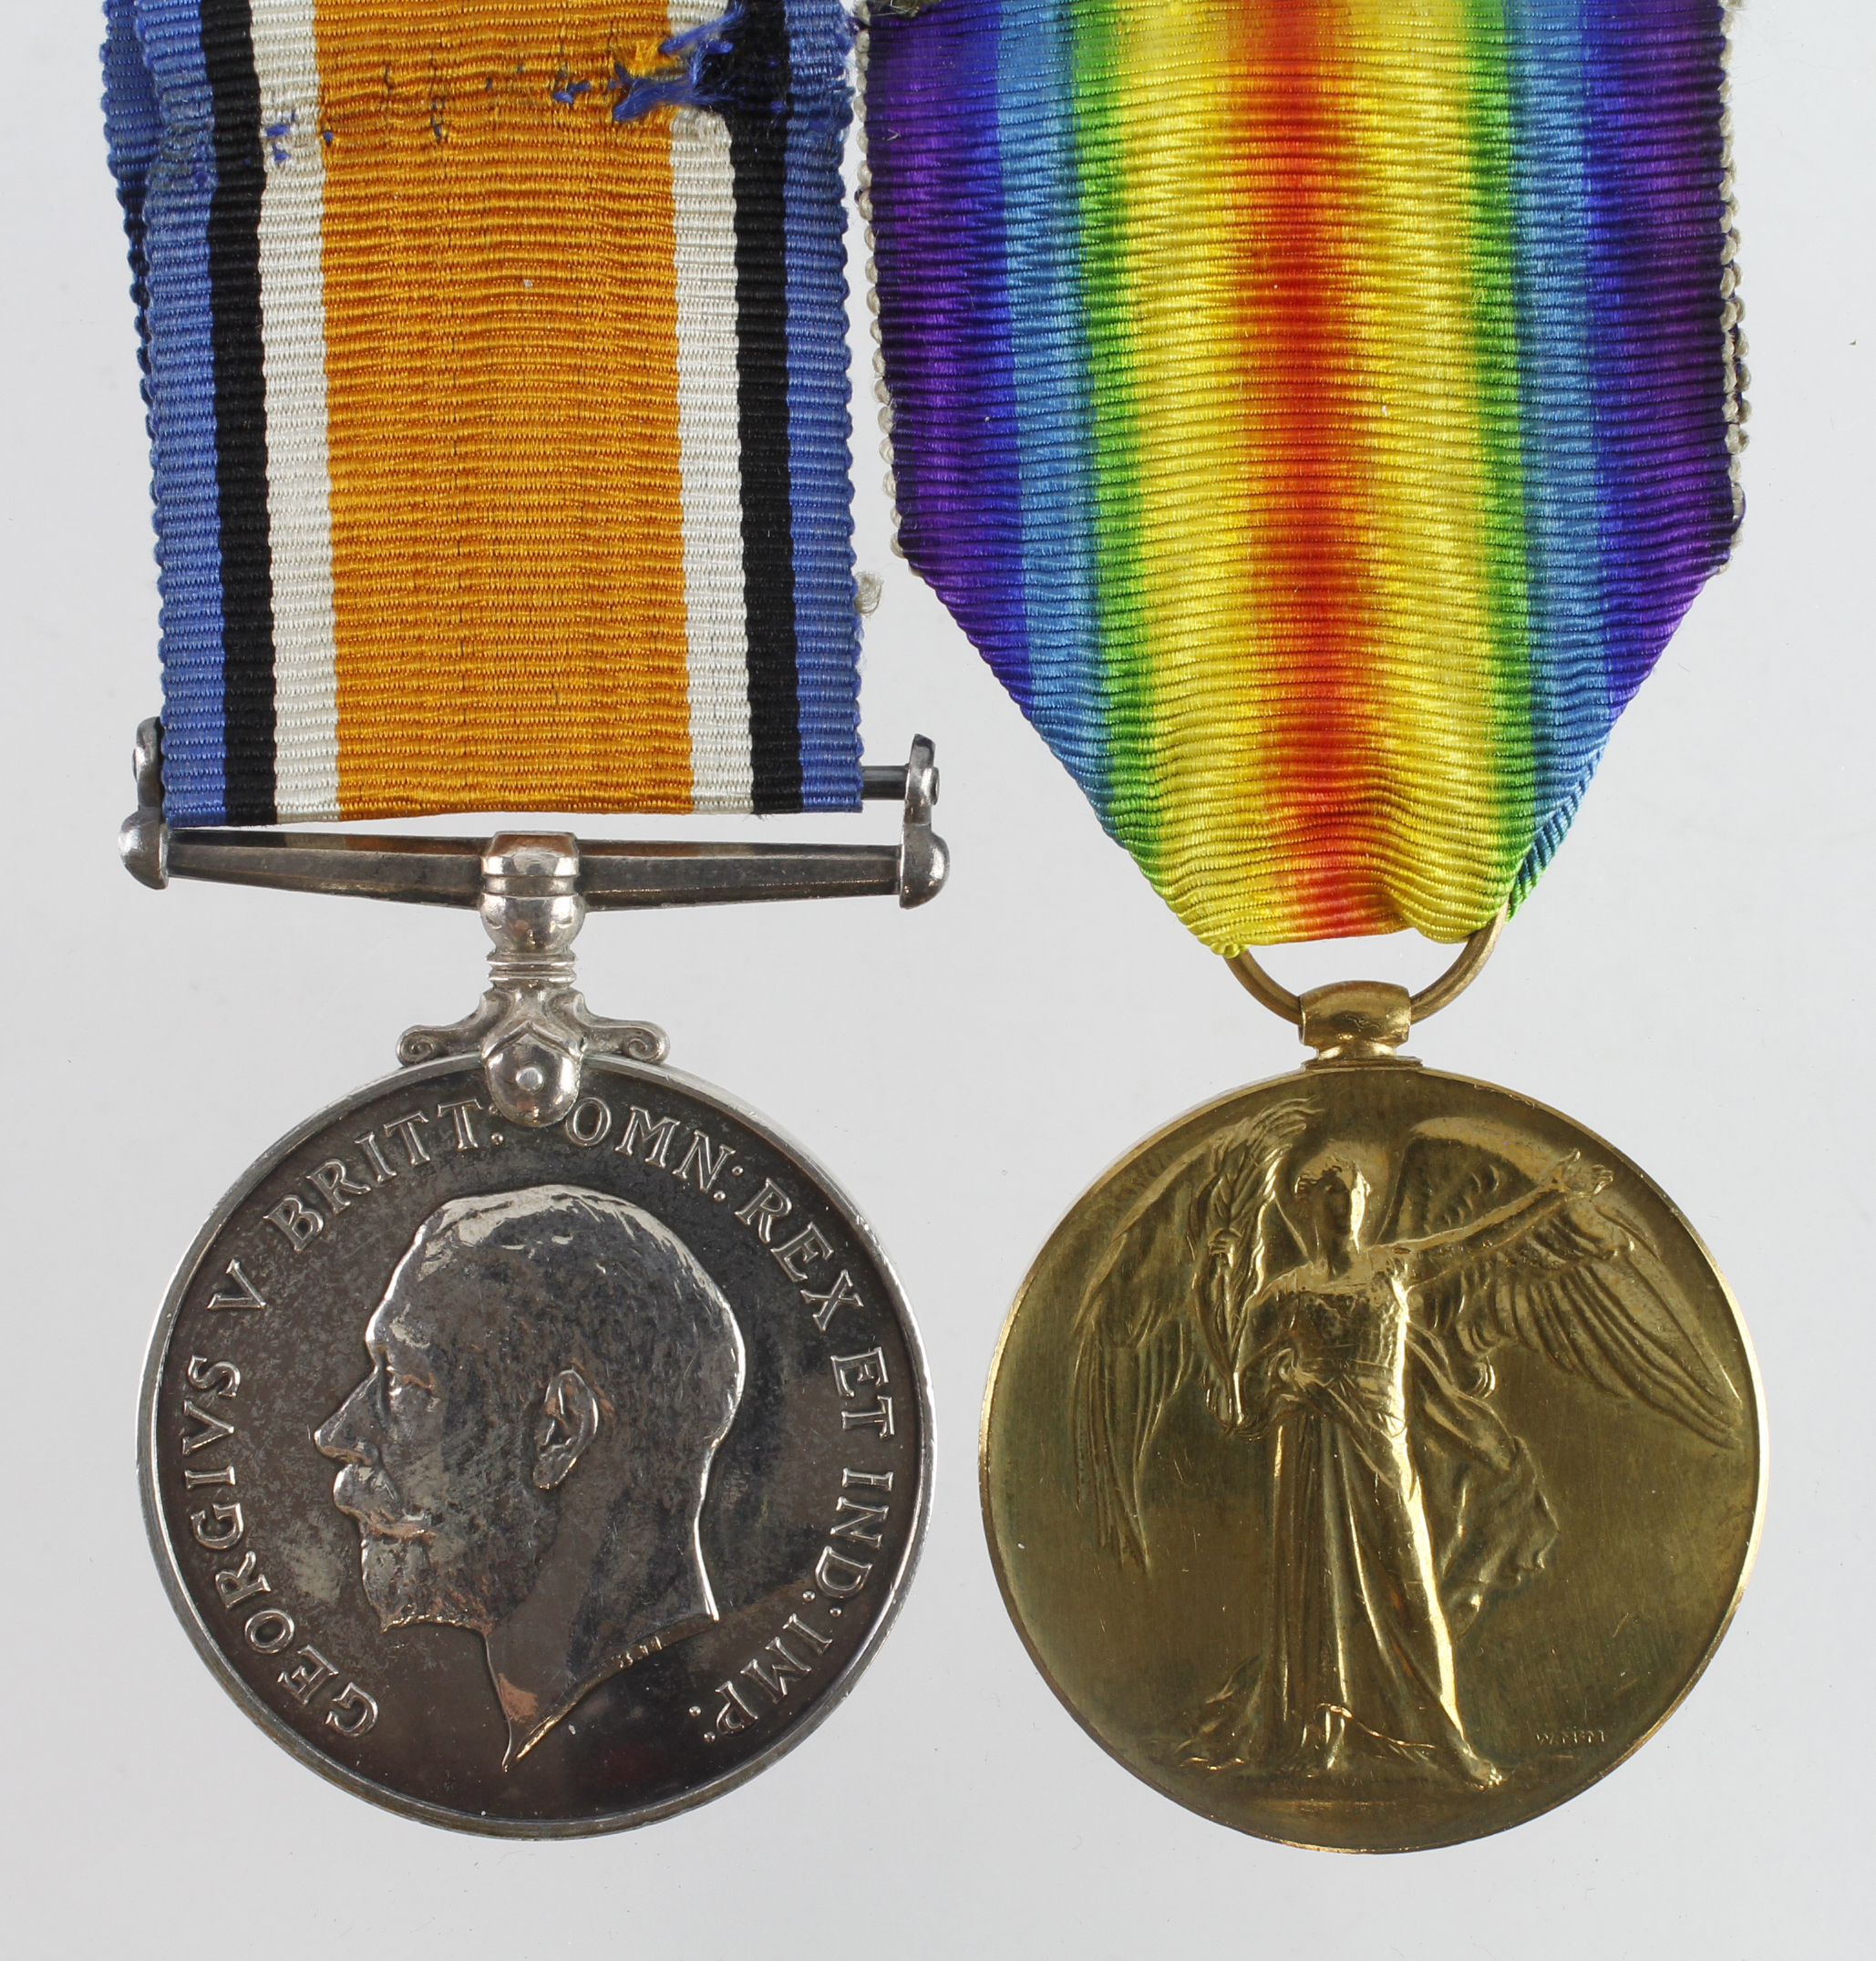 BWM & Victory Medal named (Q.M. & Lieut A Bagshaw) served 1/Y & L and the N.Staff R as a Captain.